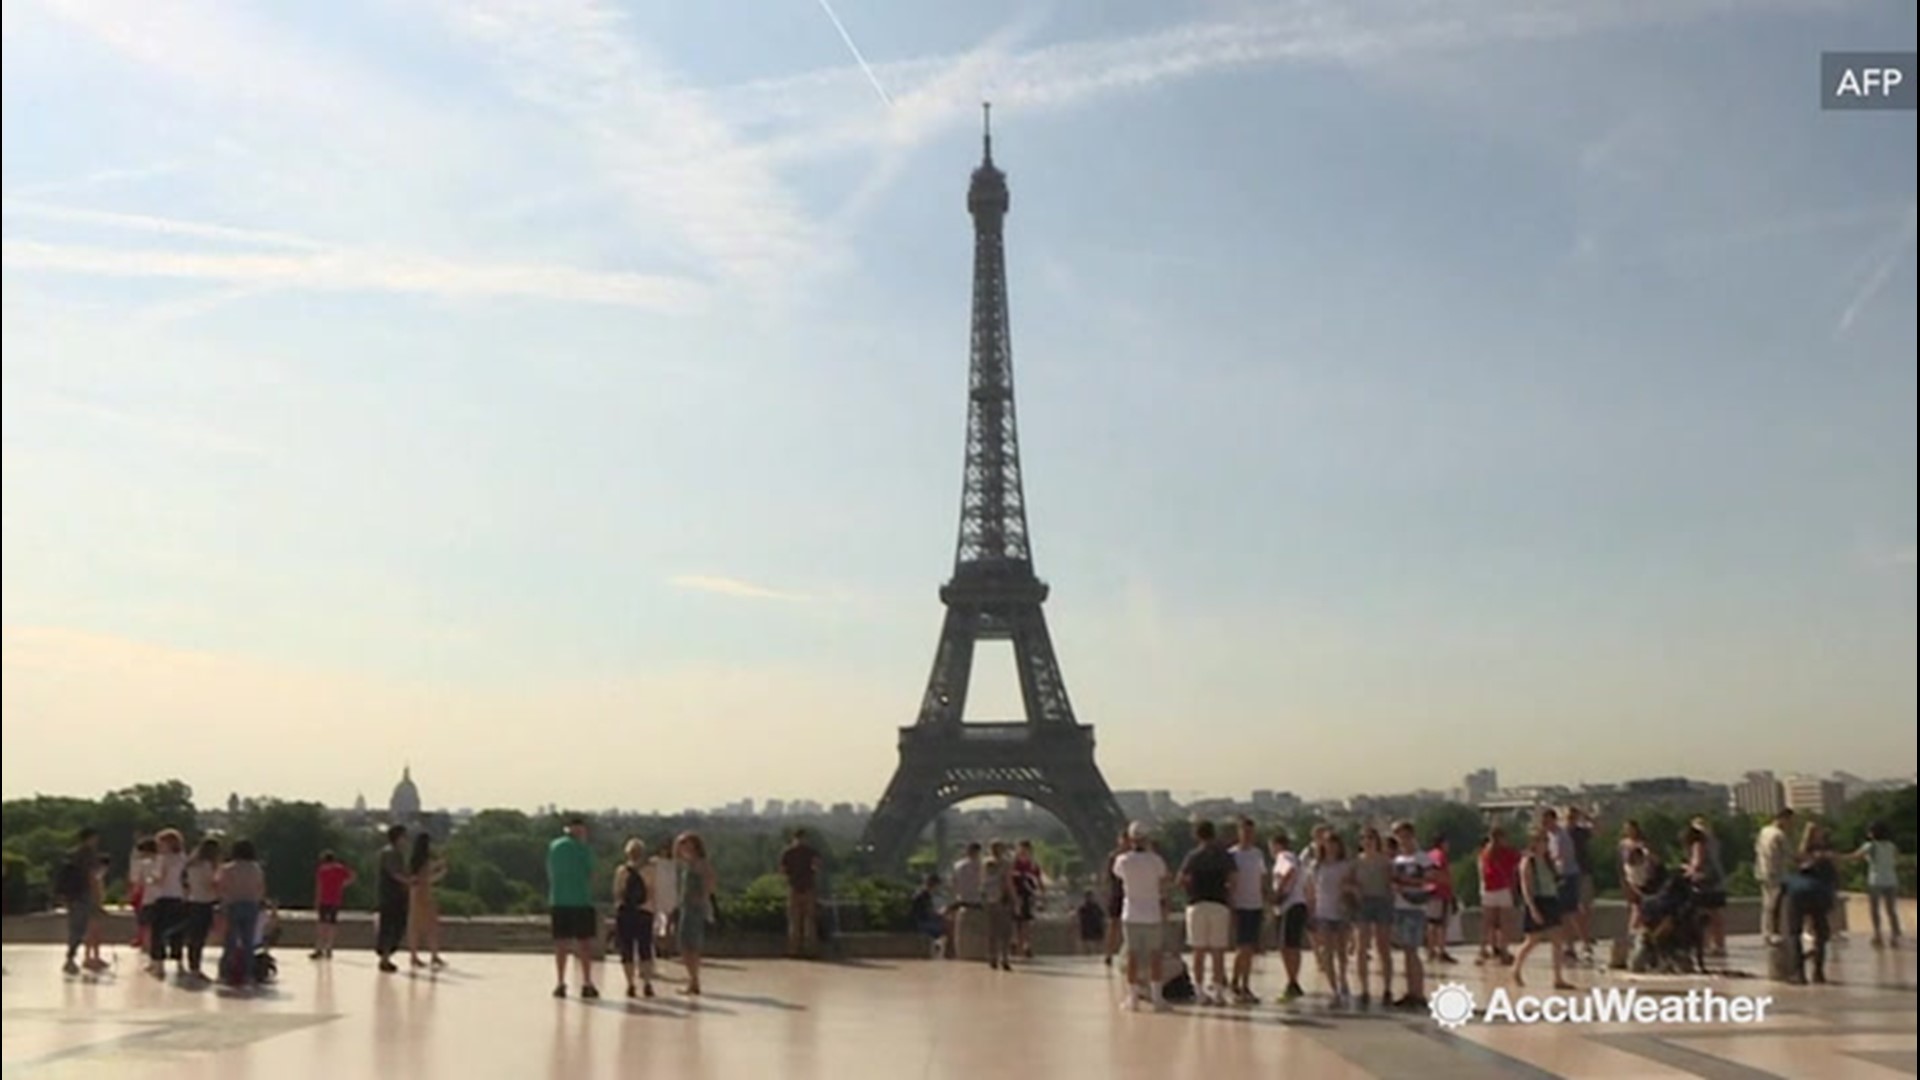 Summer may have just officially started, but in Paris, France, things are already heating up, with temperatures well over 100 degrees settling in across the city on June 24.